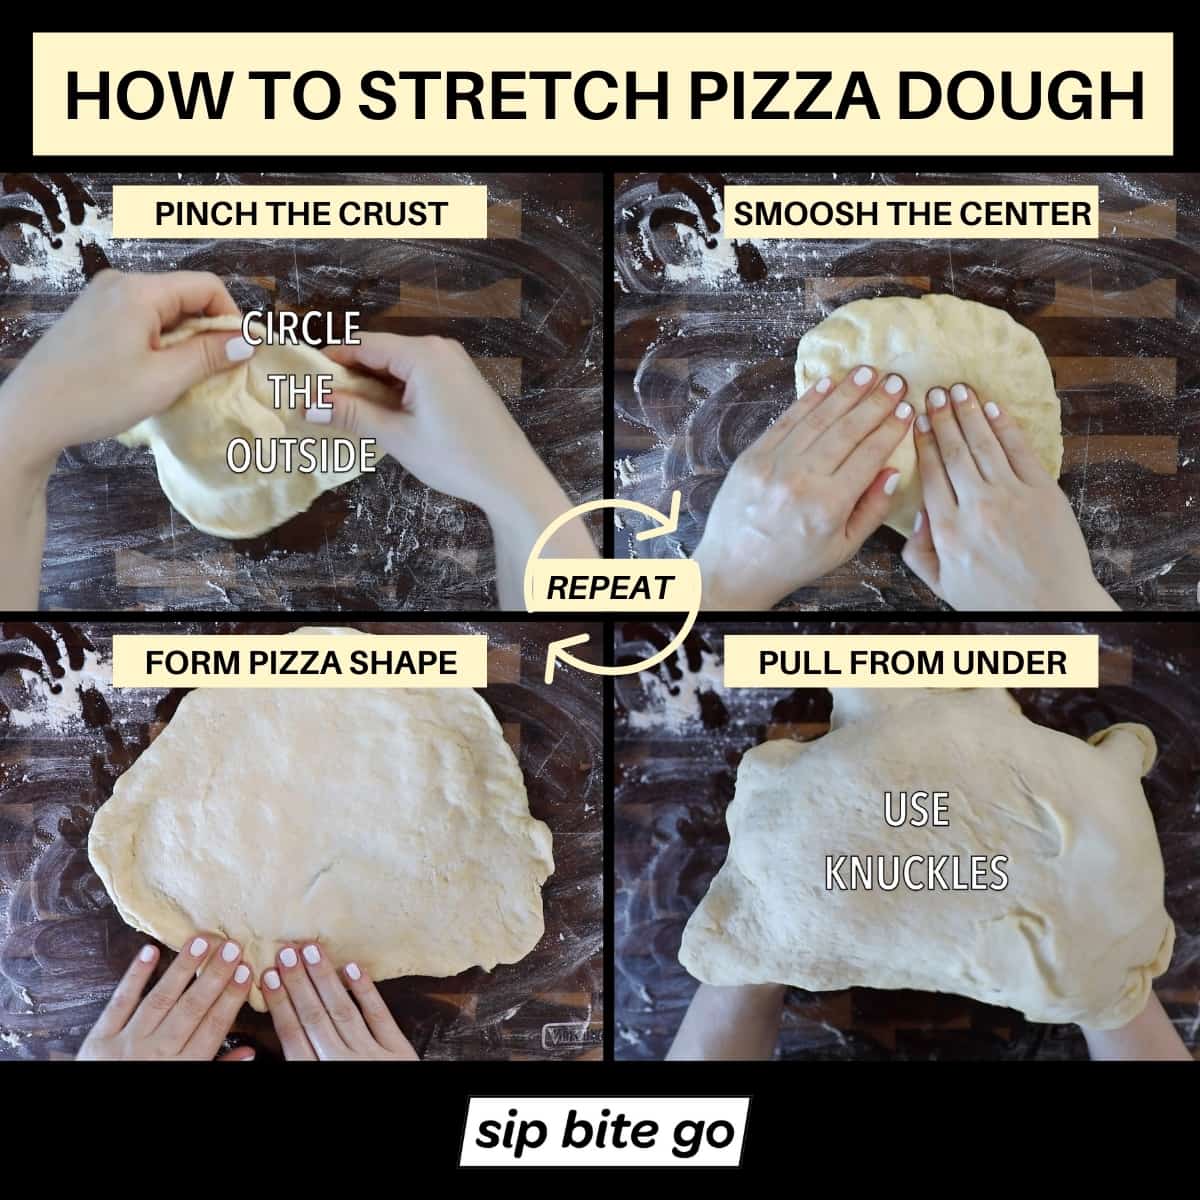 Graphic chart demonstrating how to stretch pizza dough for phillies steak pizza recipe.